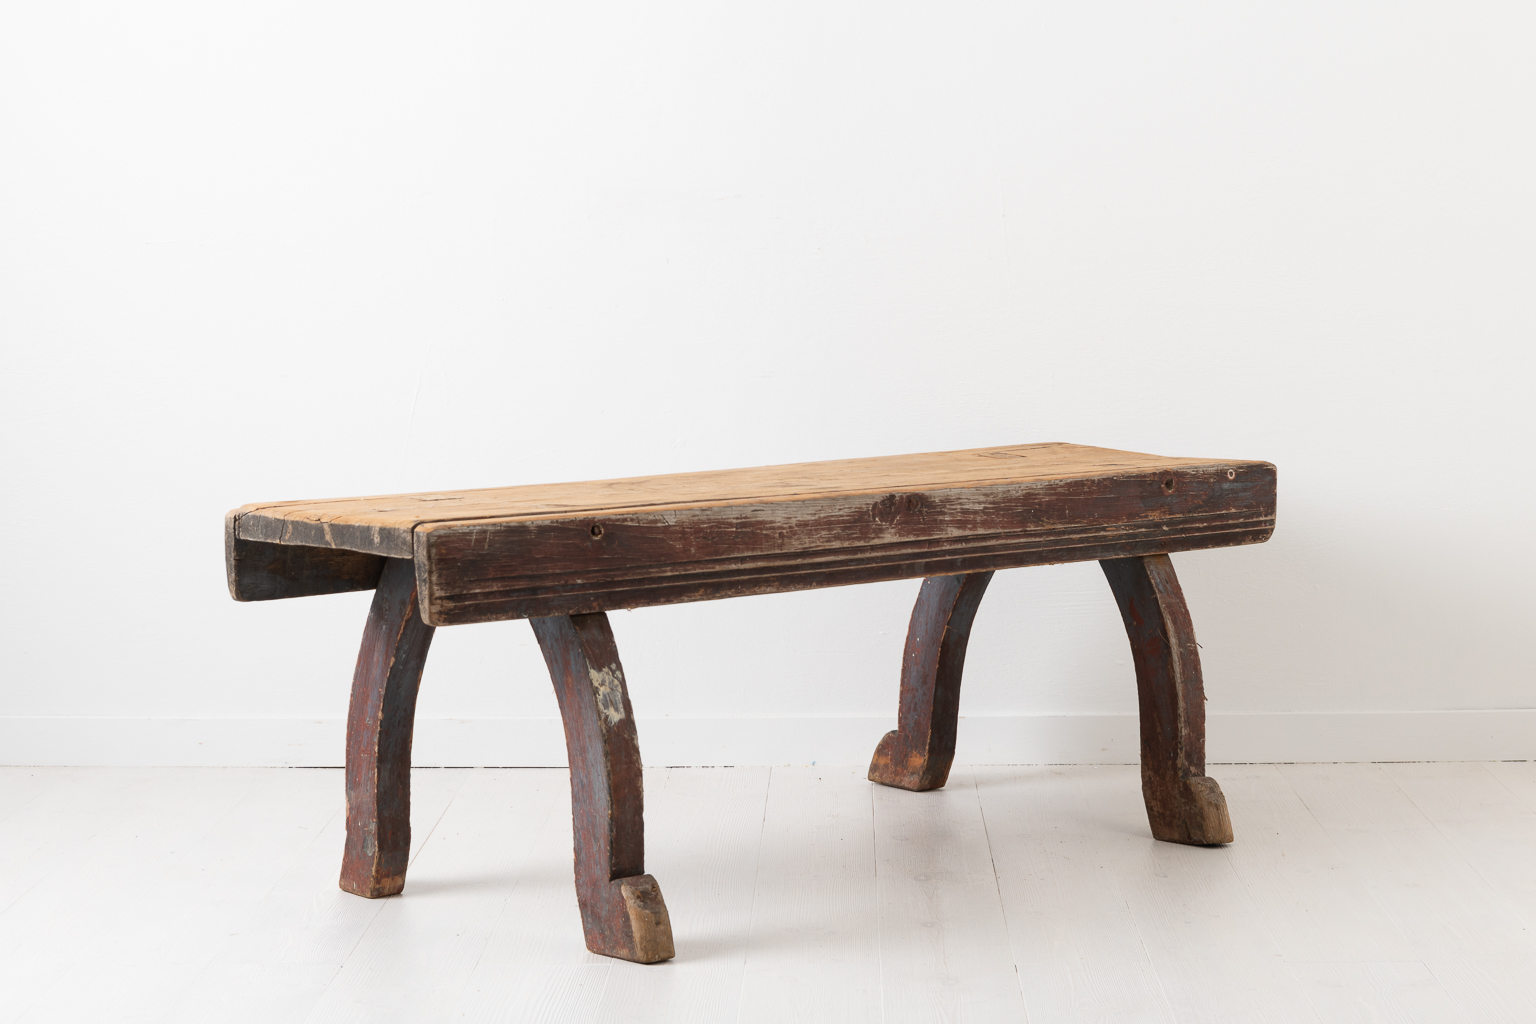 Late 18th century bench in folk art from northern Sweden. The bench is primitive and rustic with original distressed paint and authentic patina